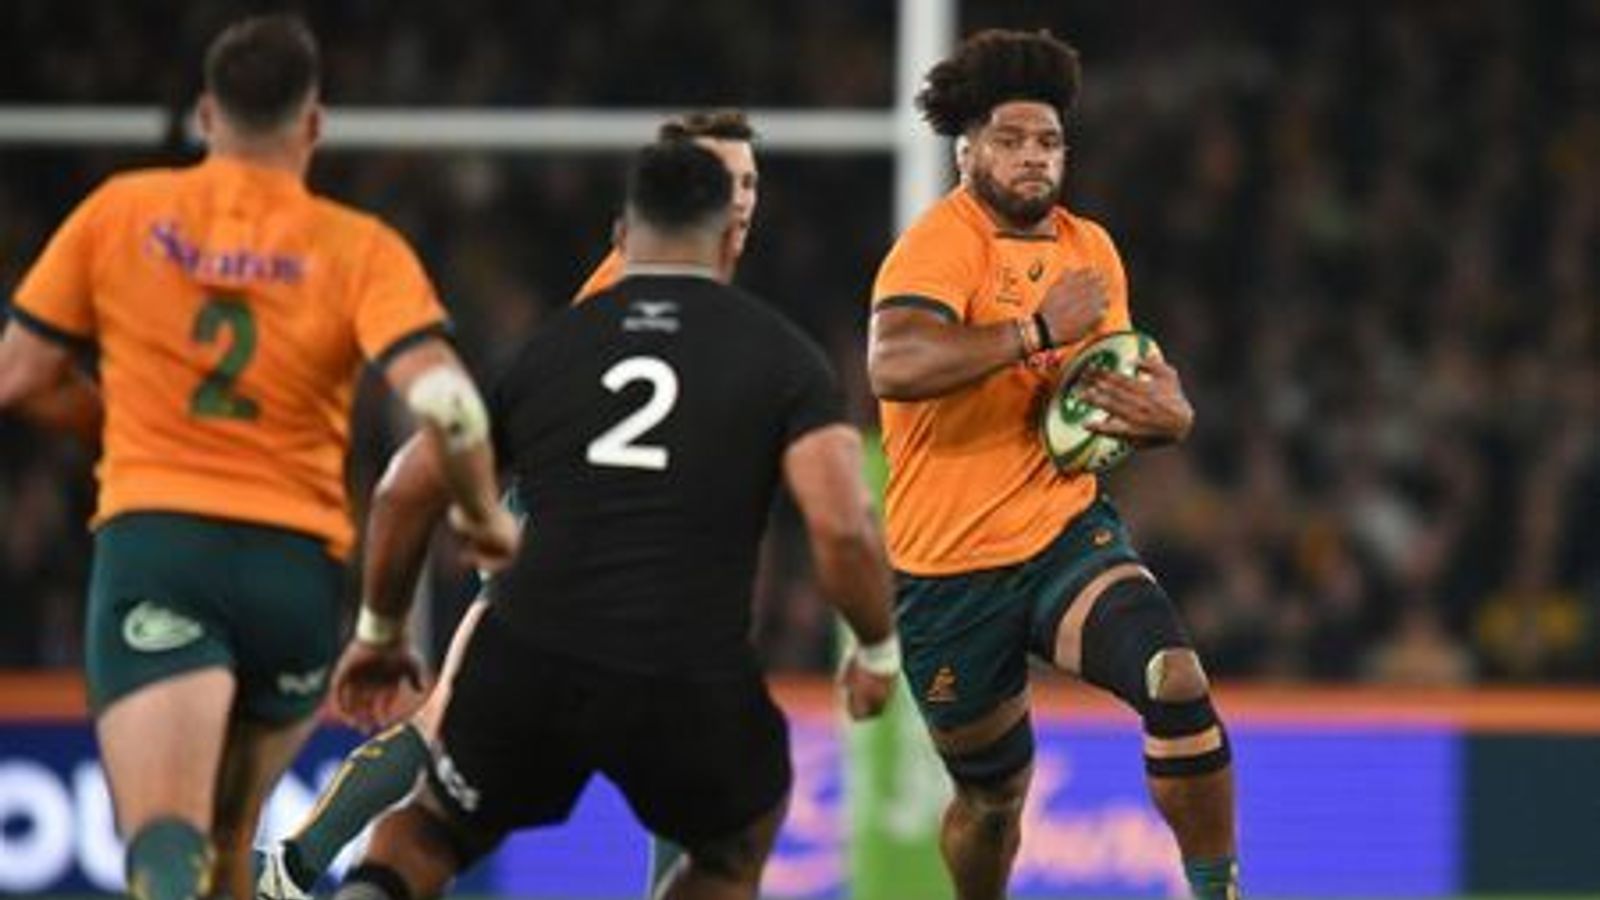 British and Irish Lions could play combined Australia and New Zealand team in 2025